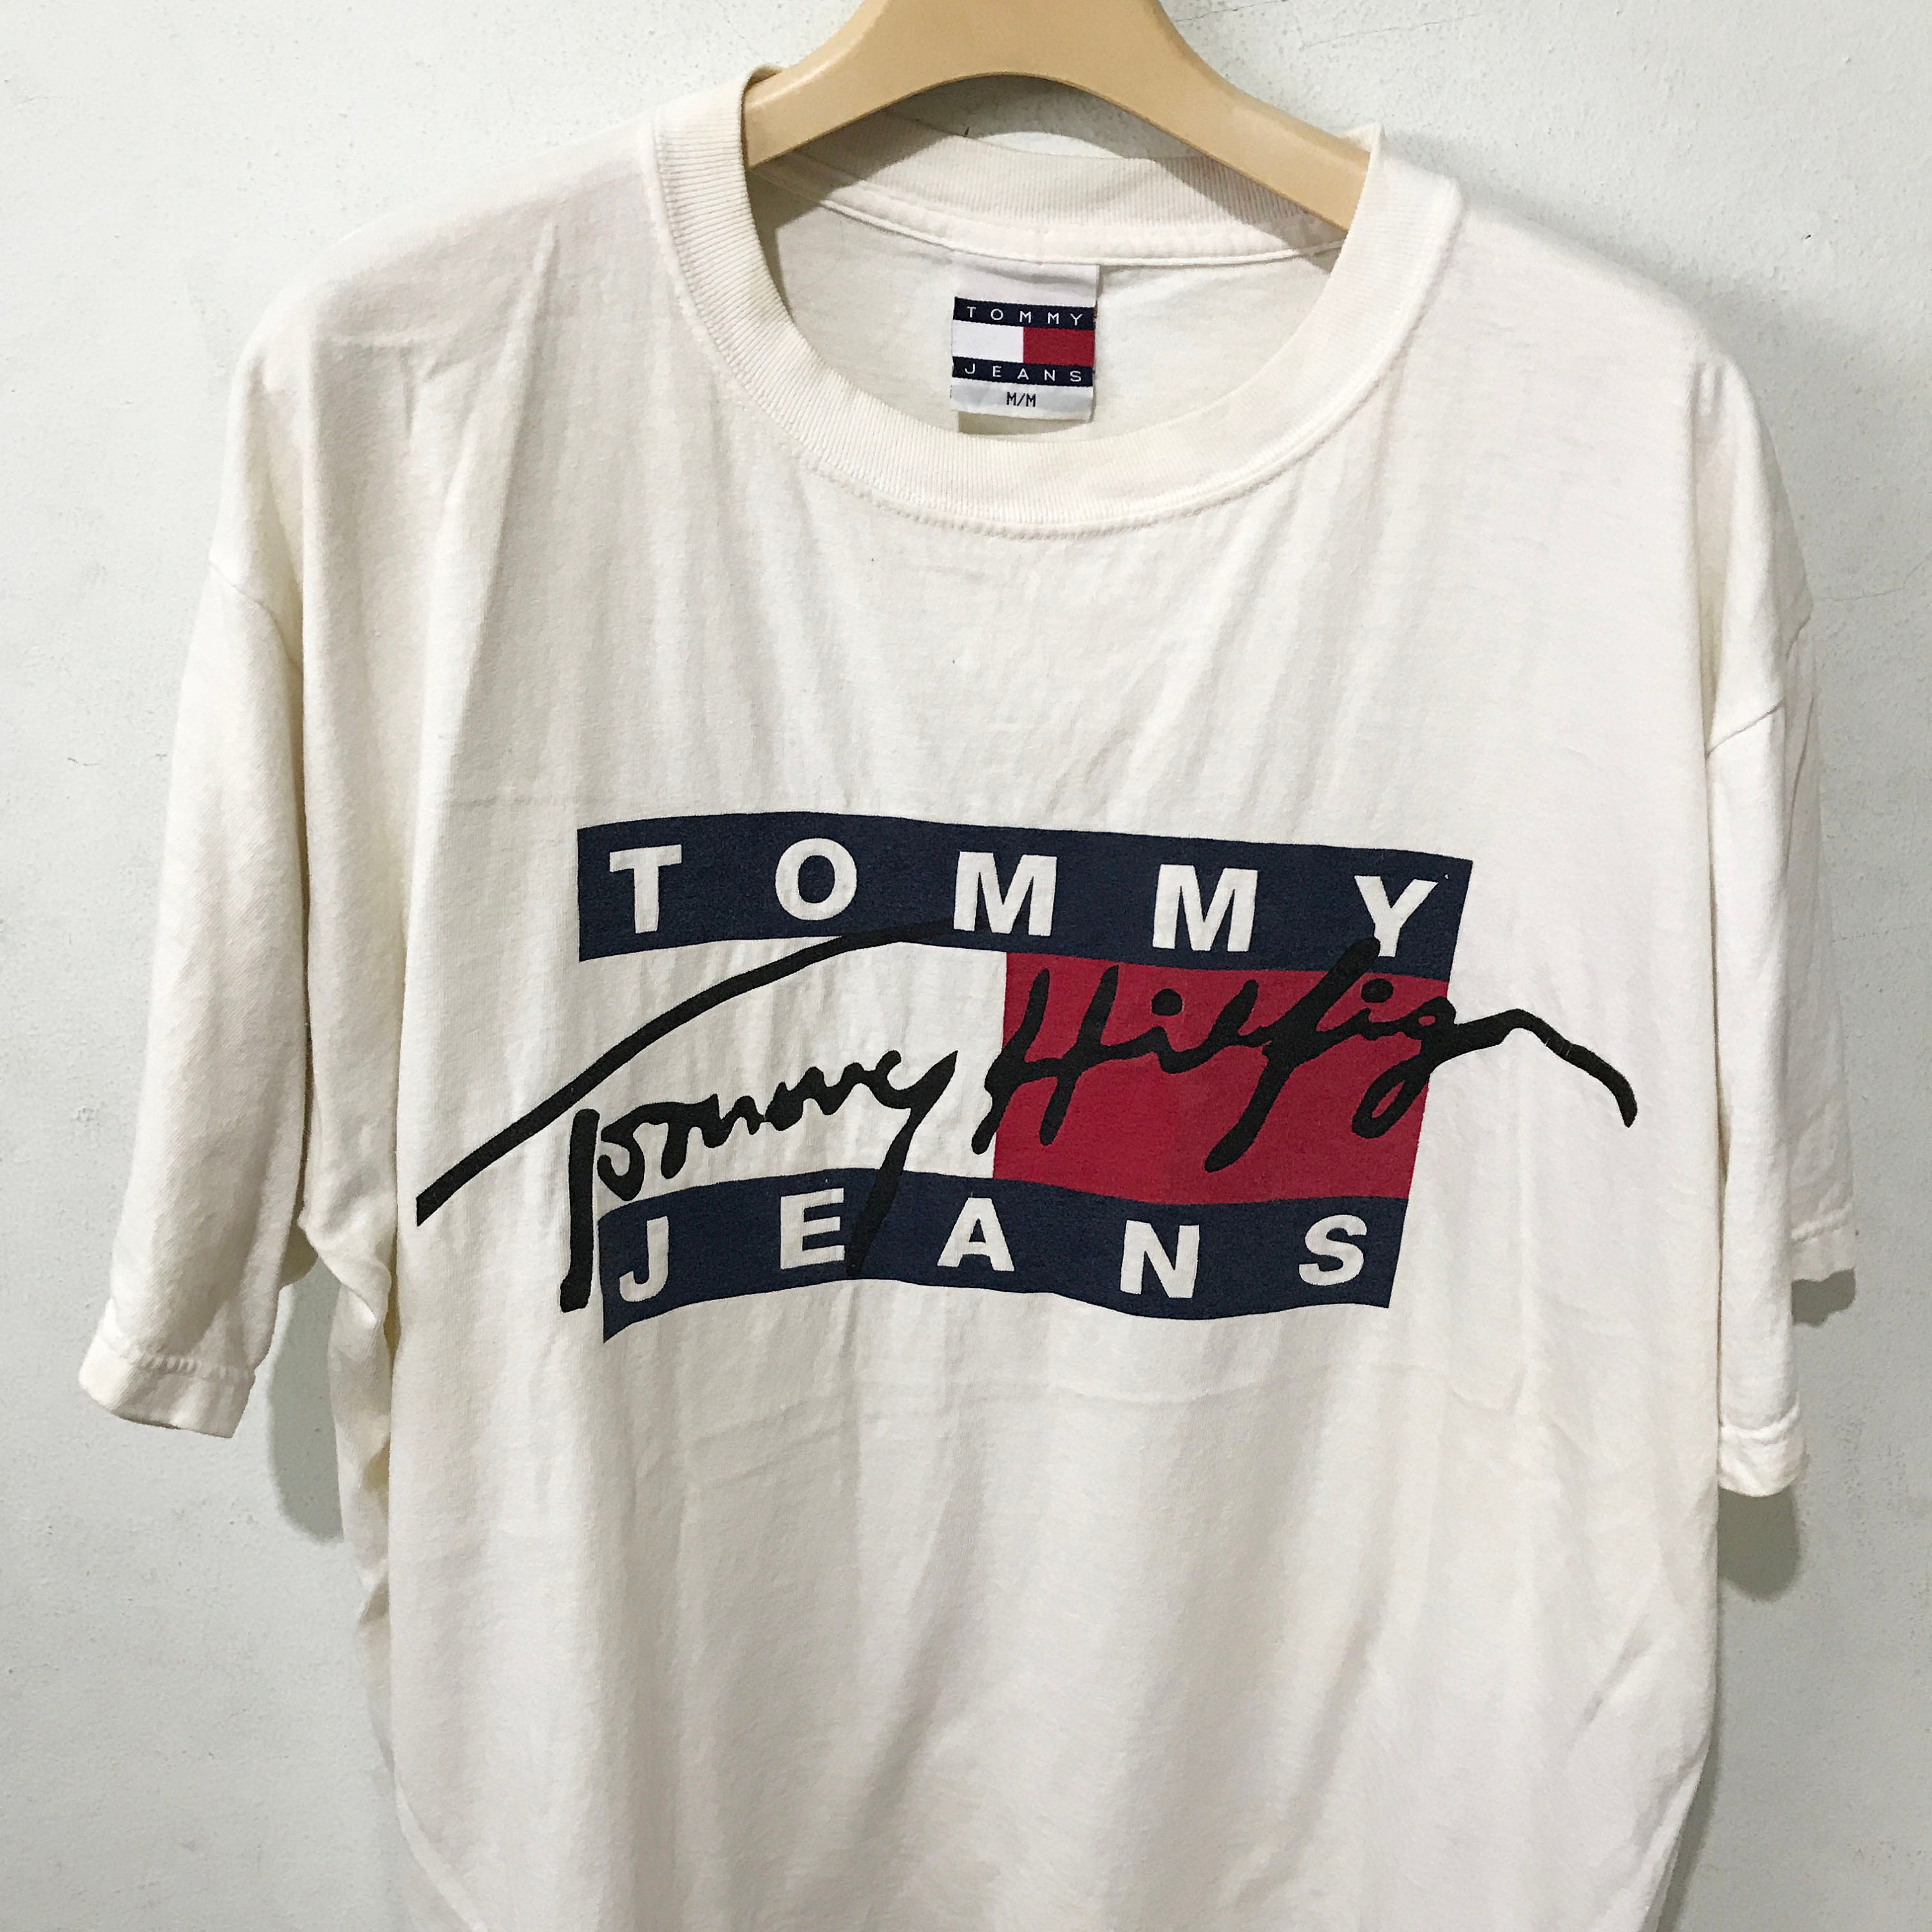 Vintage 90s Tommy Hilfiger Shirt Size L Free Shipping | Etsy